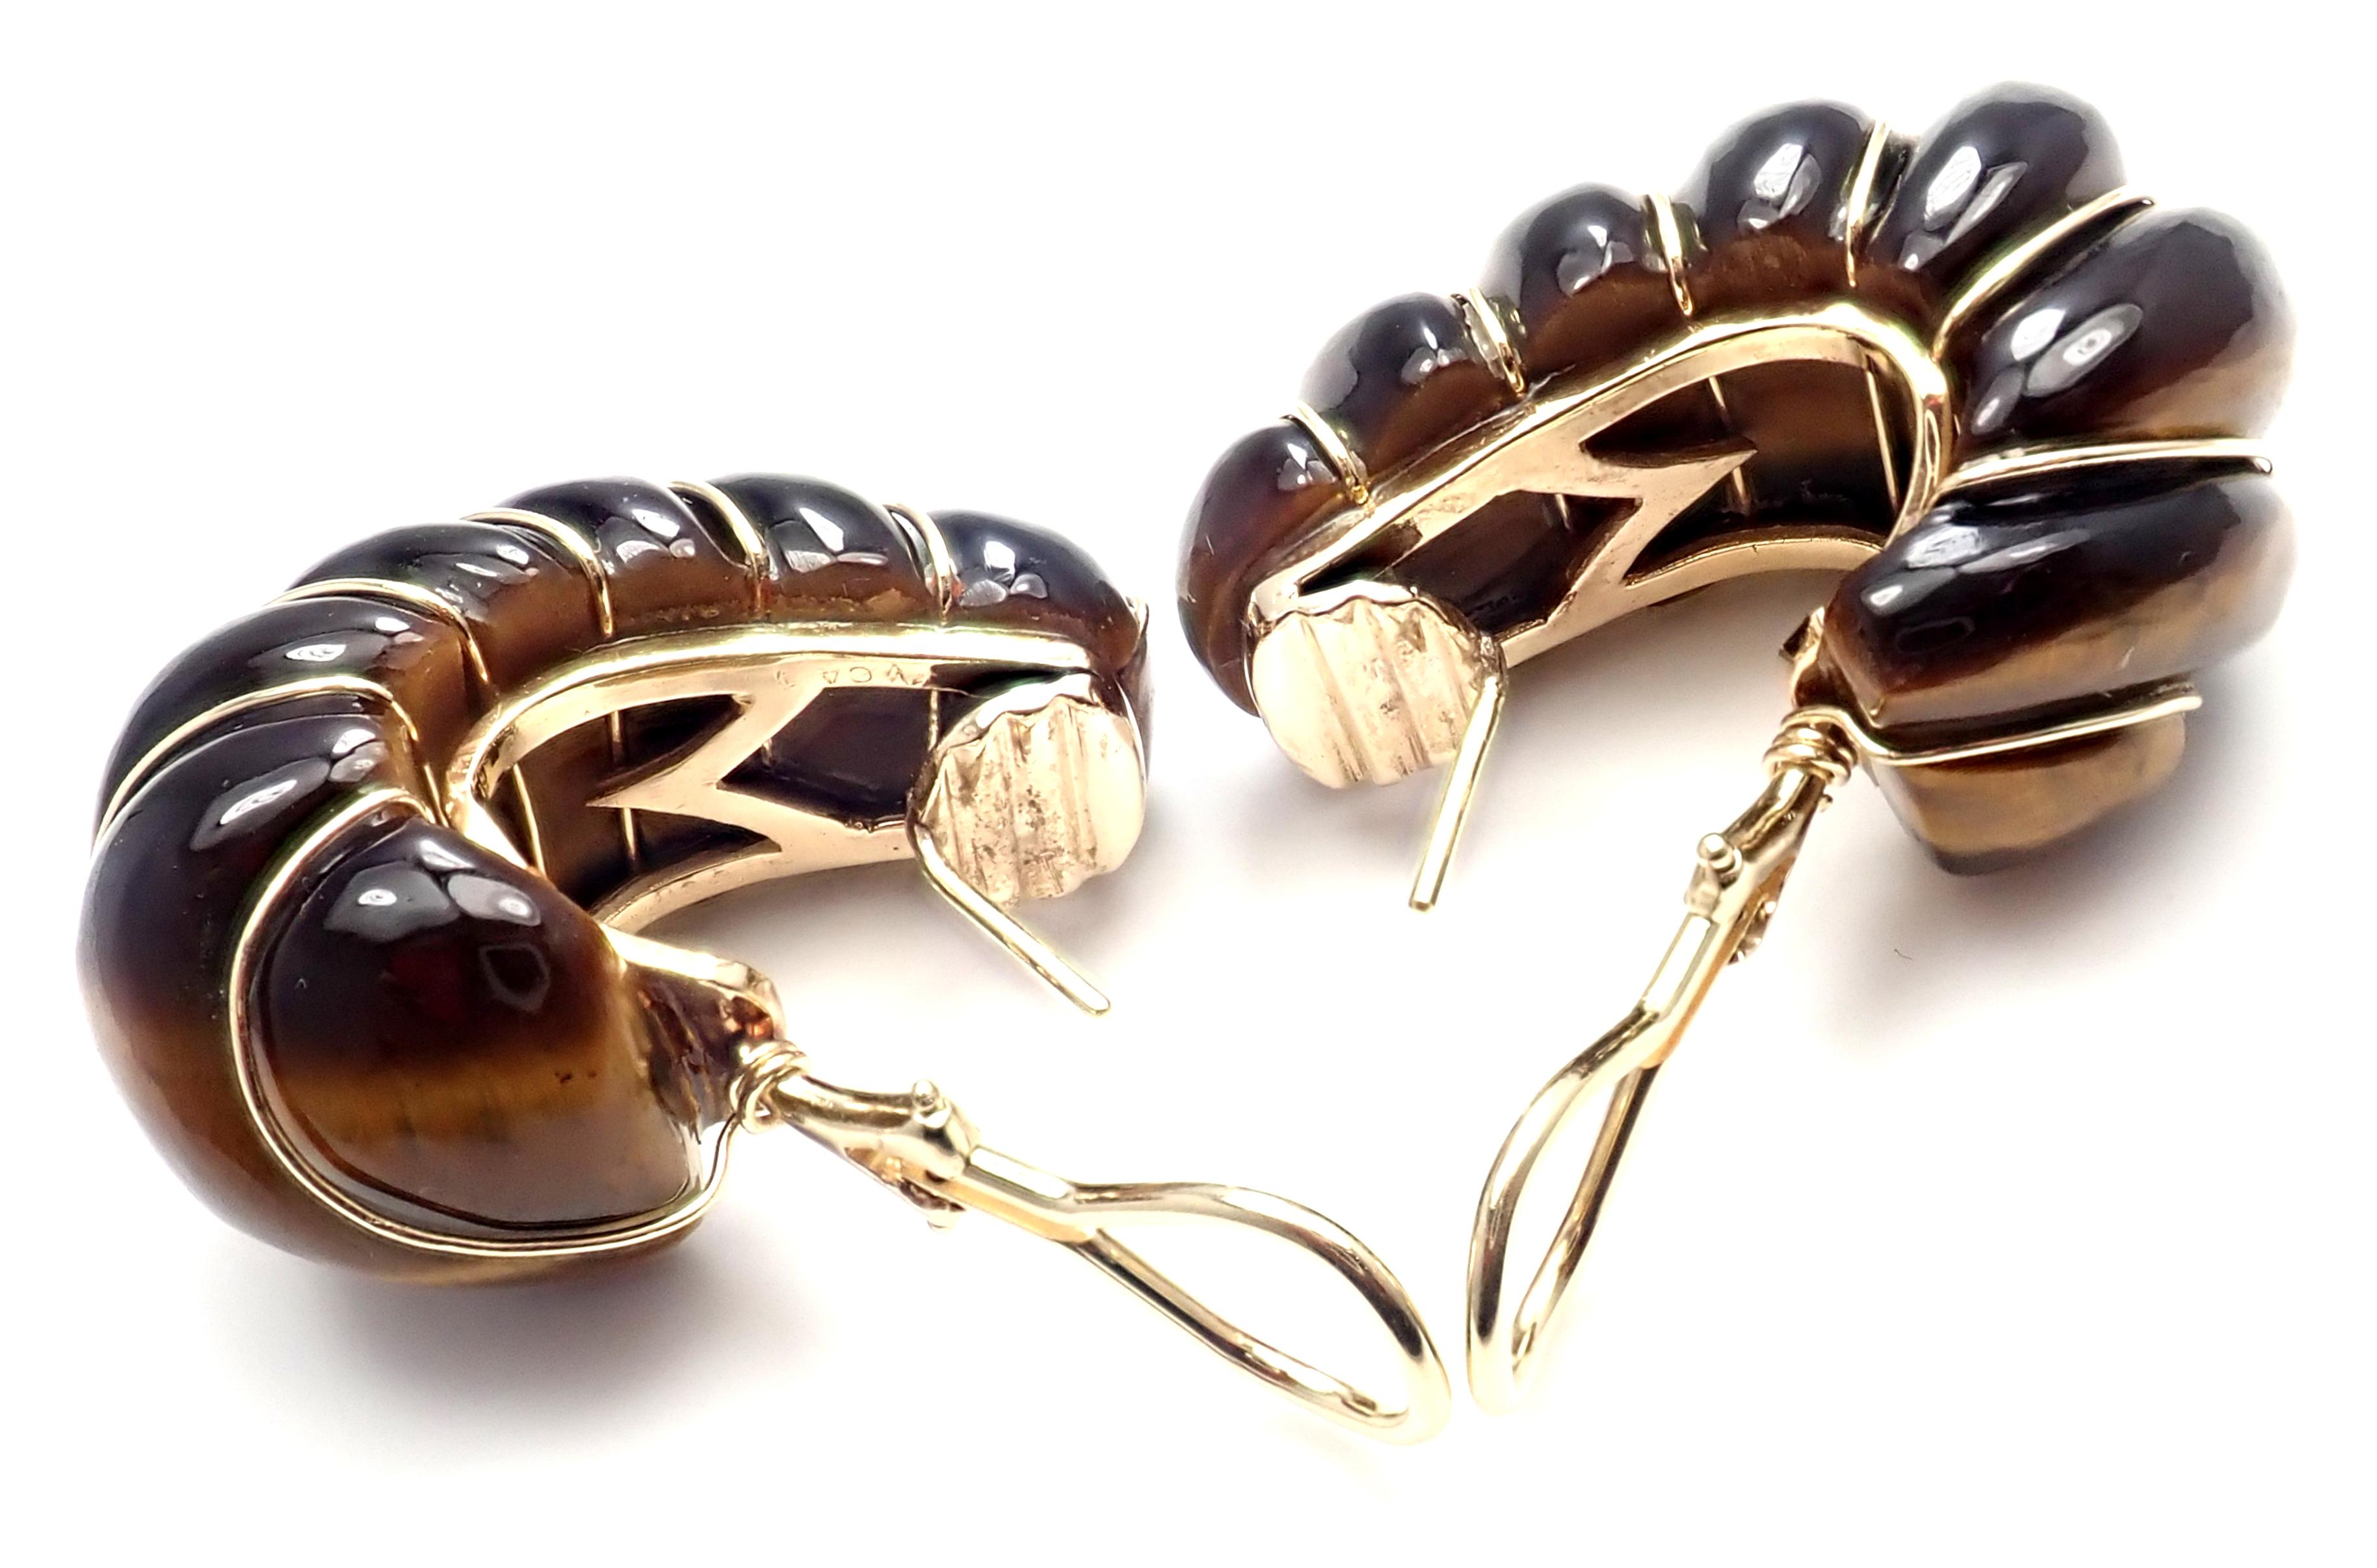 18k Yellow Gold Tiger's Eye Vintage Hoop Earrings by Van Cleef & Arpels.
With 2 carved tiger eye stones.
Details:
Weight: 33 grams
Measurements: 33mm x 17mm
Stamped Hallmarks: VCA 3V883.7 
*Free Shipping within the United States*
YOUR PRICE: